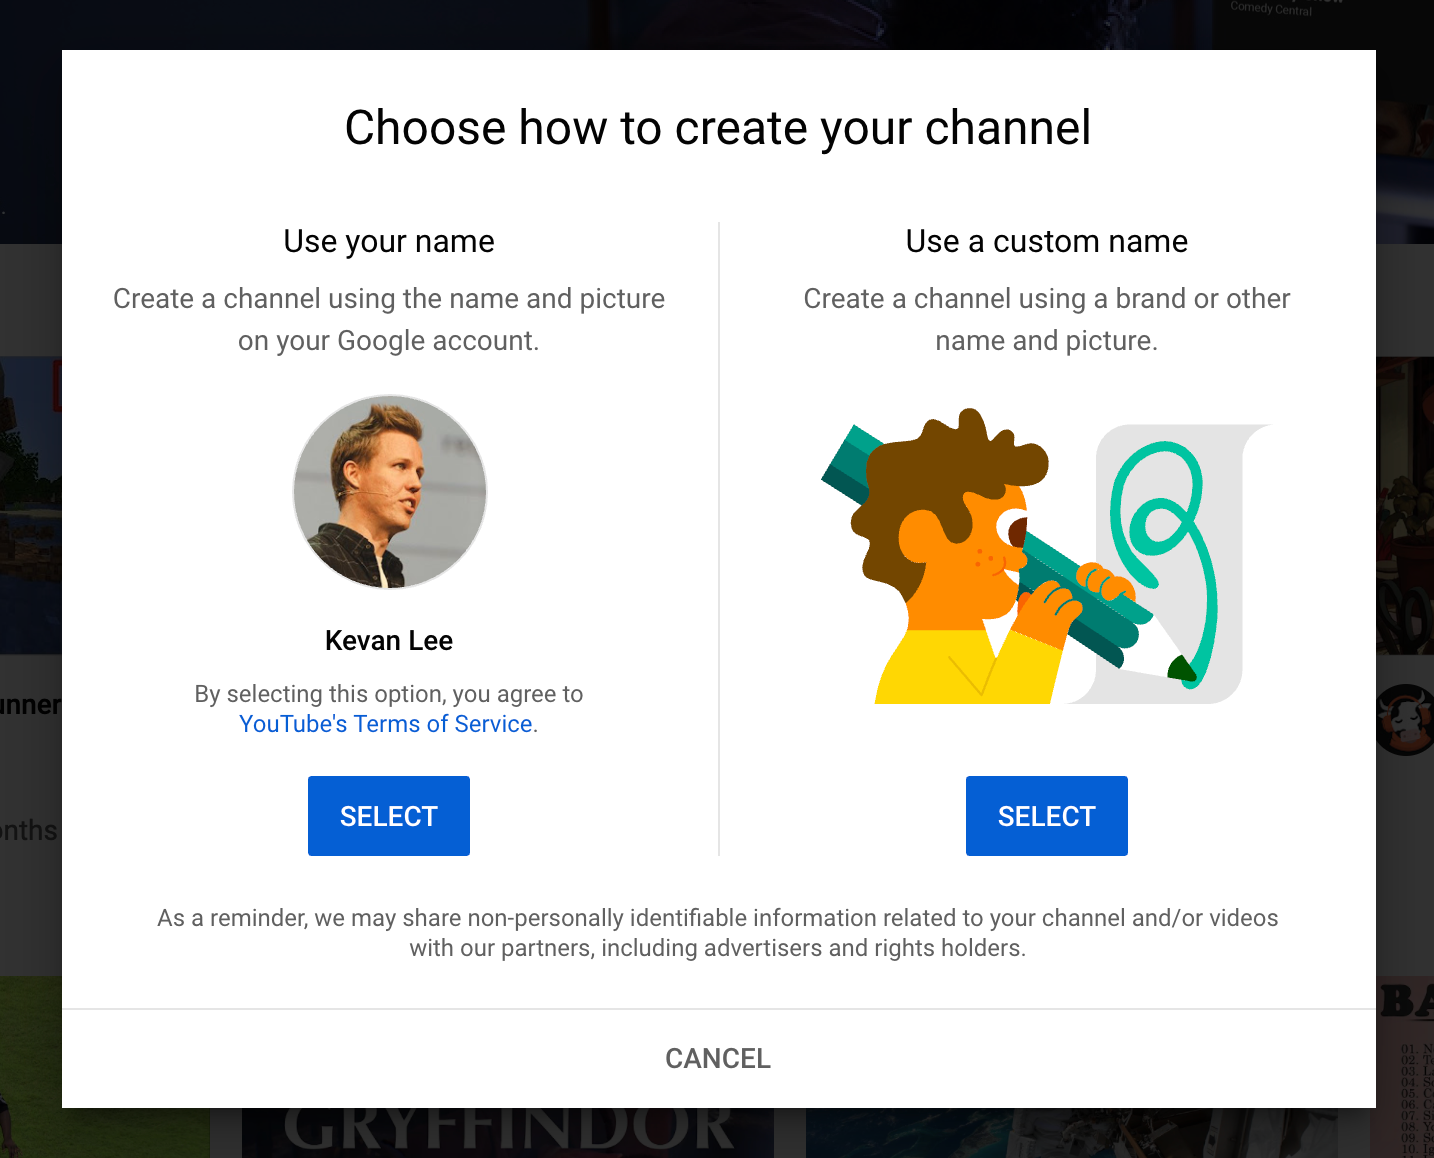 You have the option create a YouTube channel with your name or a custom name.